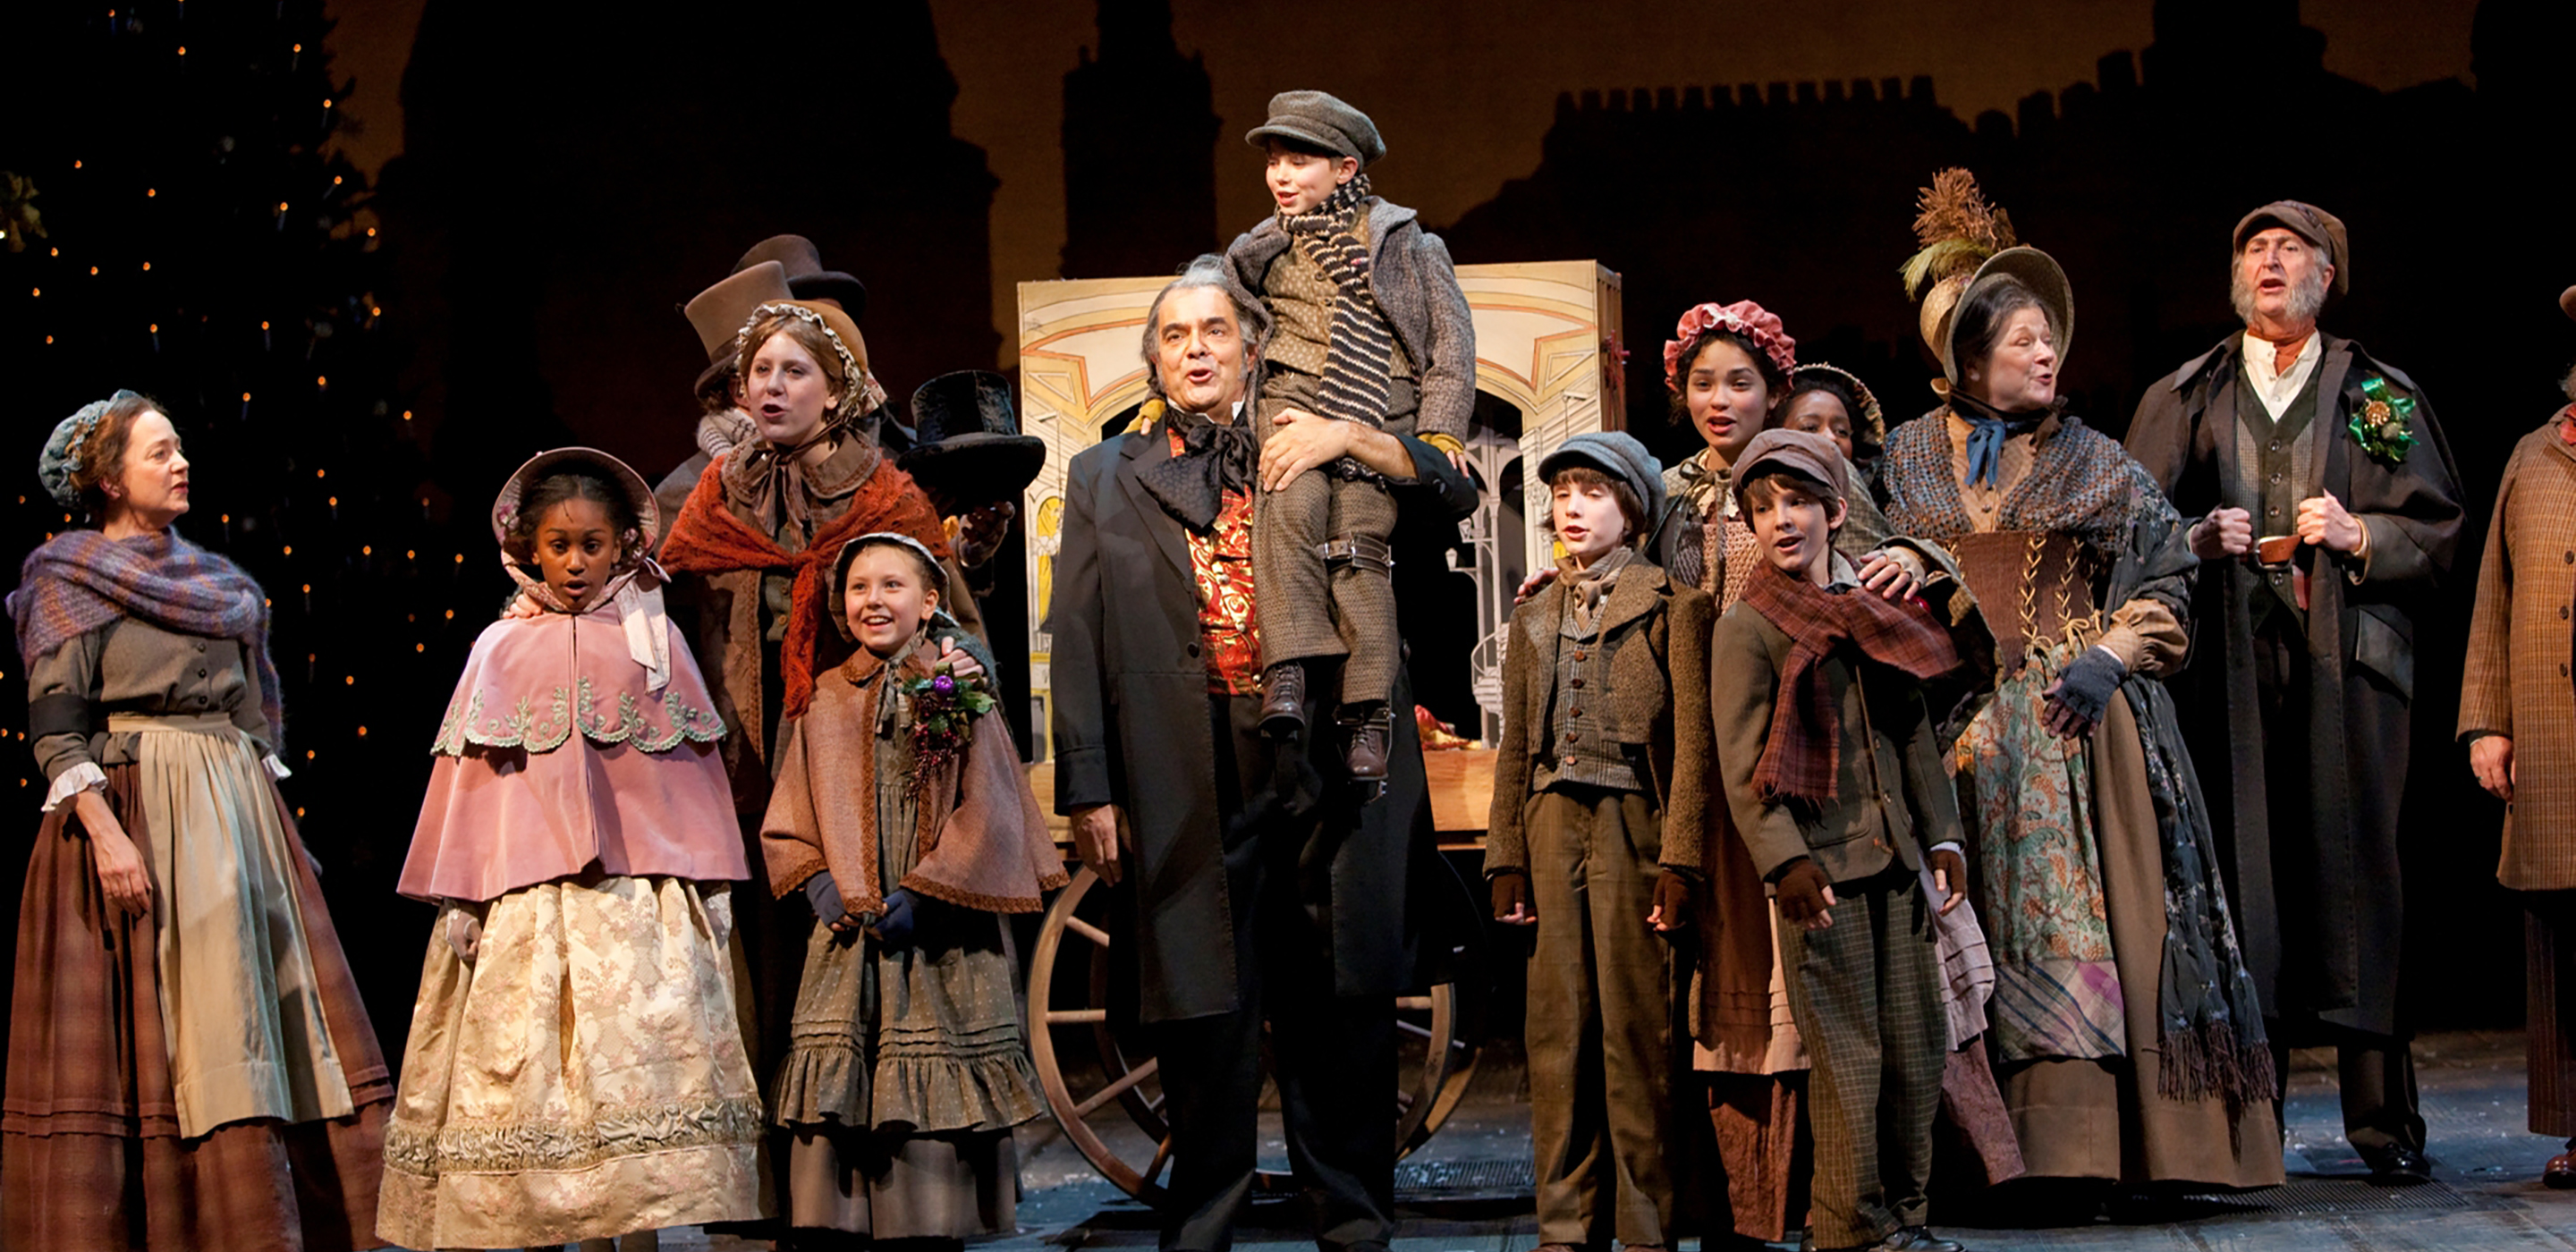 Seven children and five adults in Victorian costume surround the actor playing Scrooge on set at Ford’s Theatre. A young boy (playing Tiny Tim) sits on Scrooge’s shoulders.